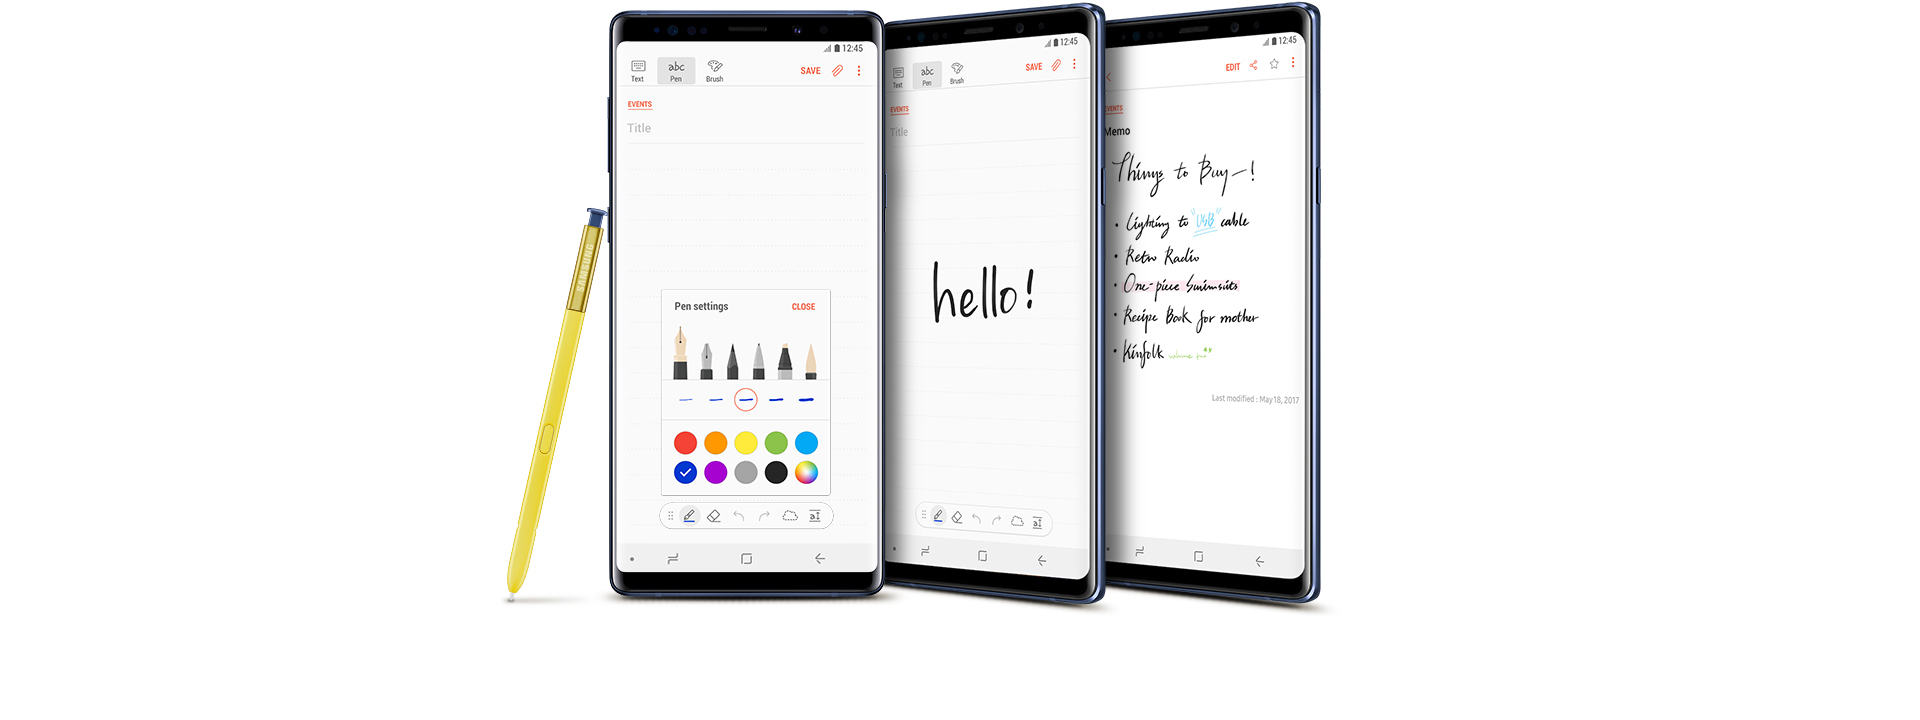 notes samsung galaxy apps note examples express yourself note8